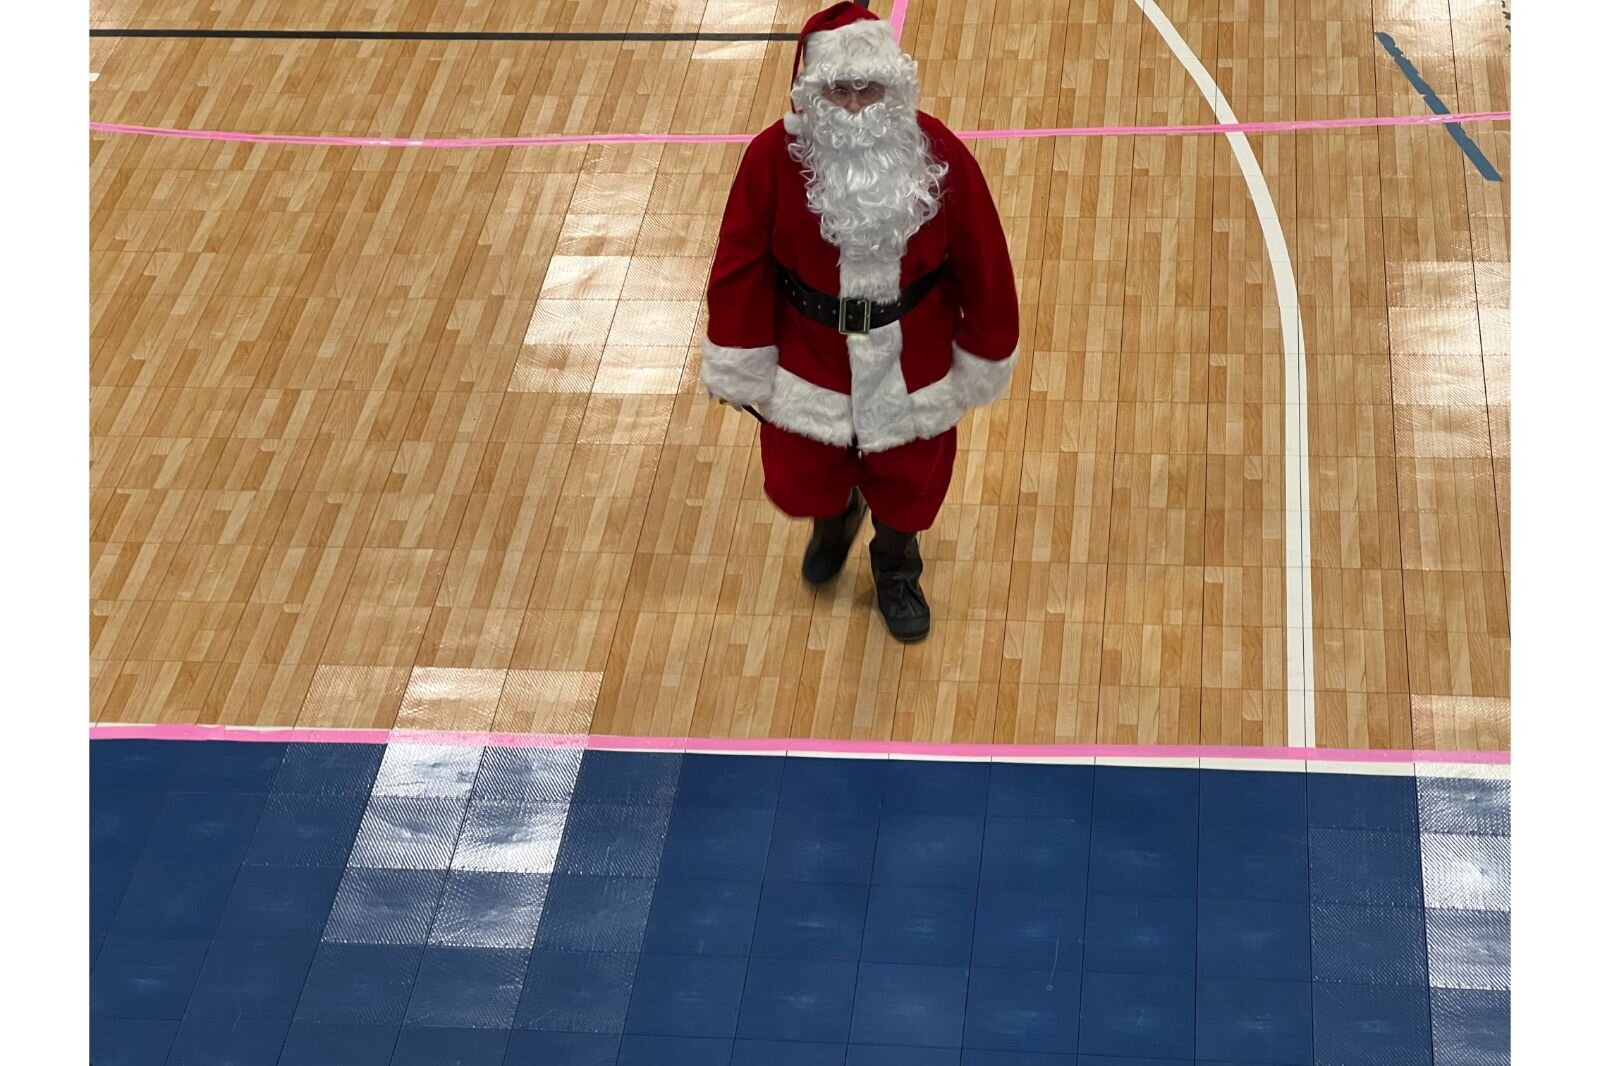 Santa made an appearance at the pre Halloween costumed bout.